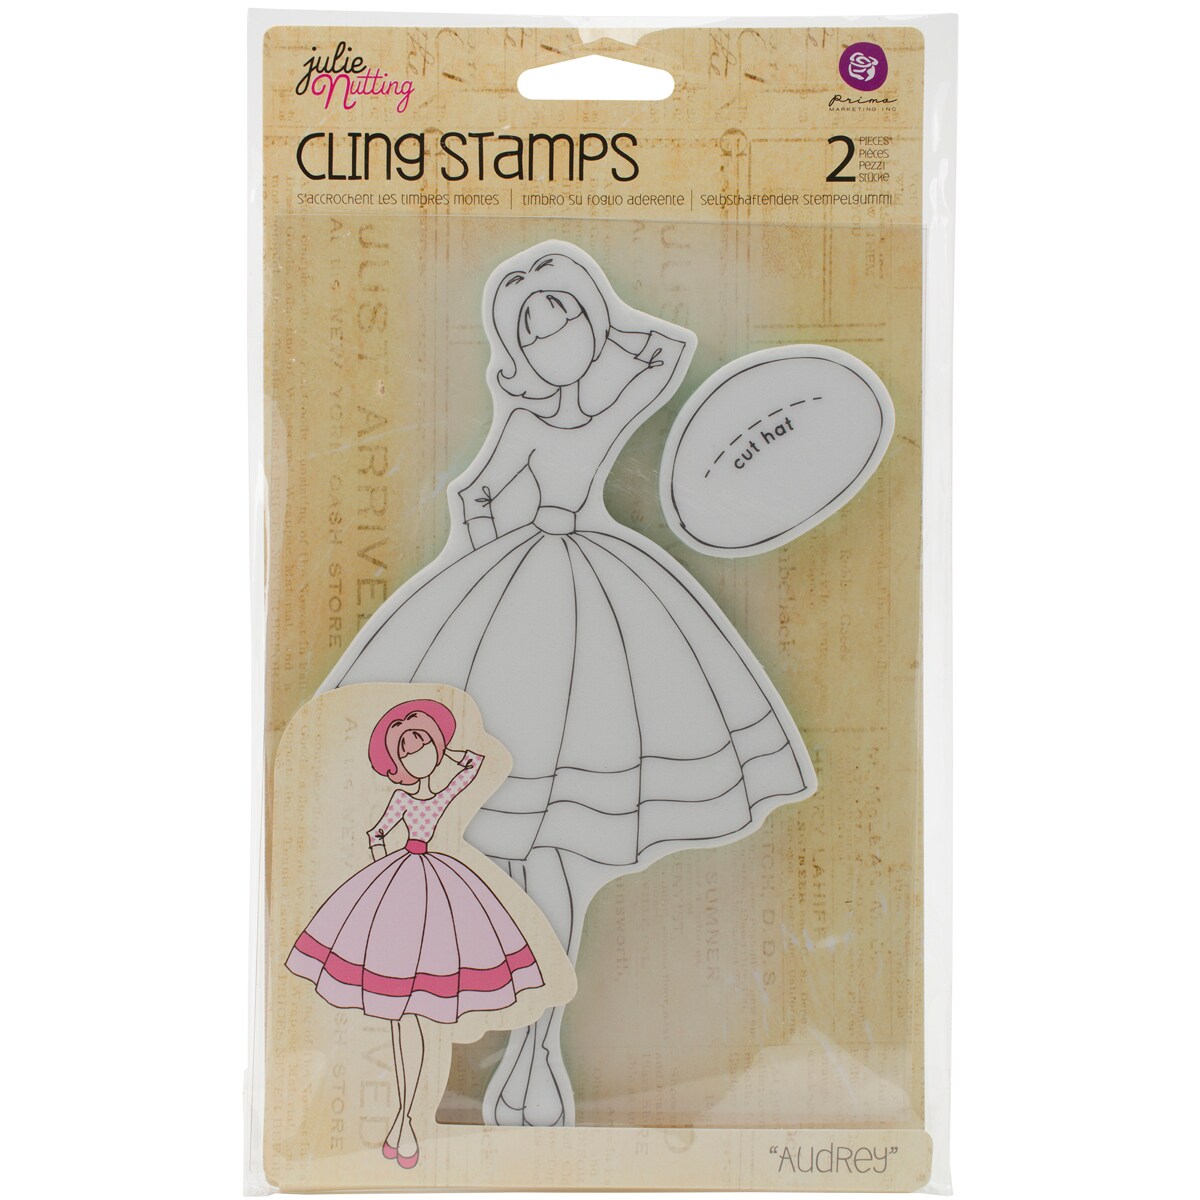 Prima Marketing Julie Nutting Mixed Media Cling Rubber Stamp-Audrey